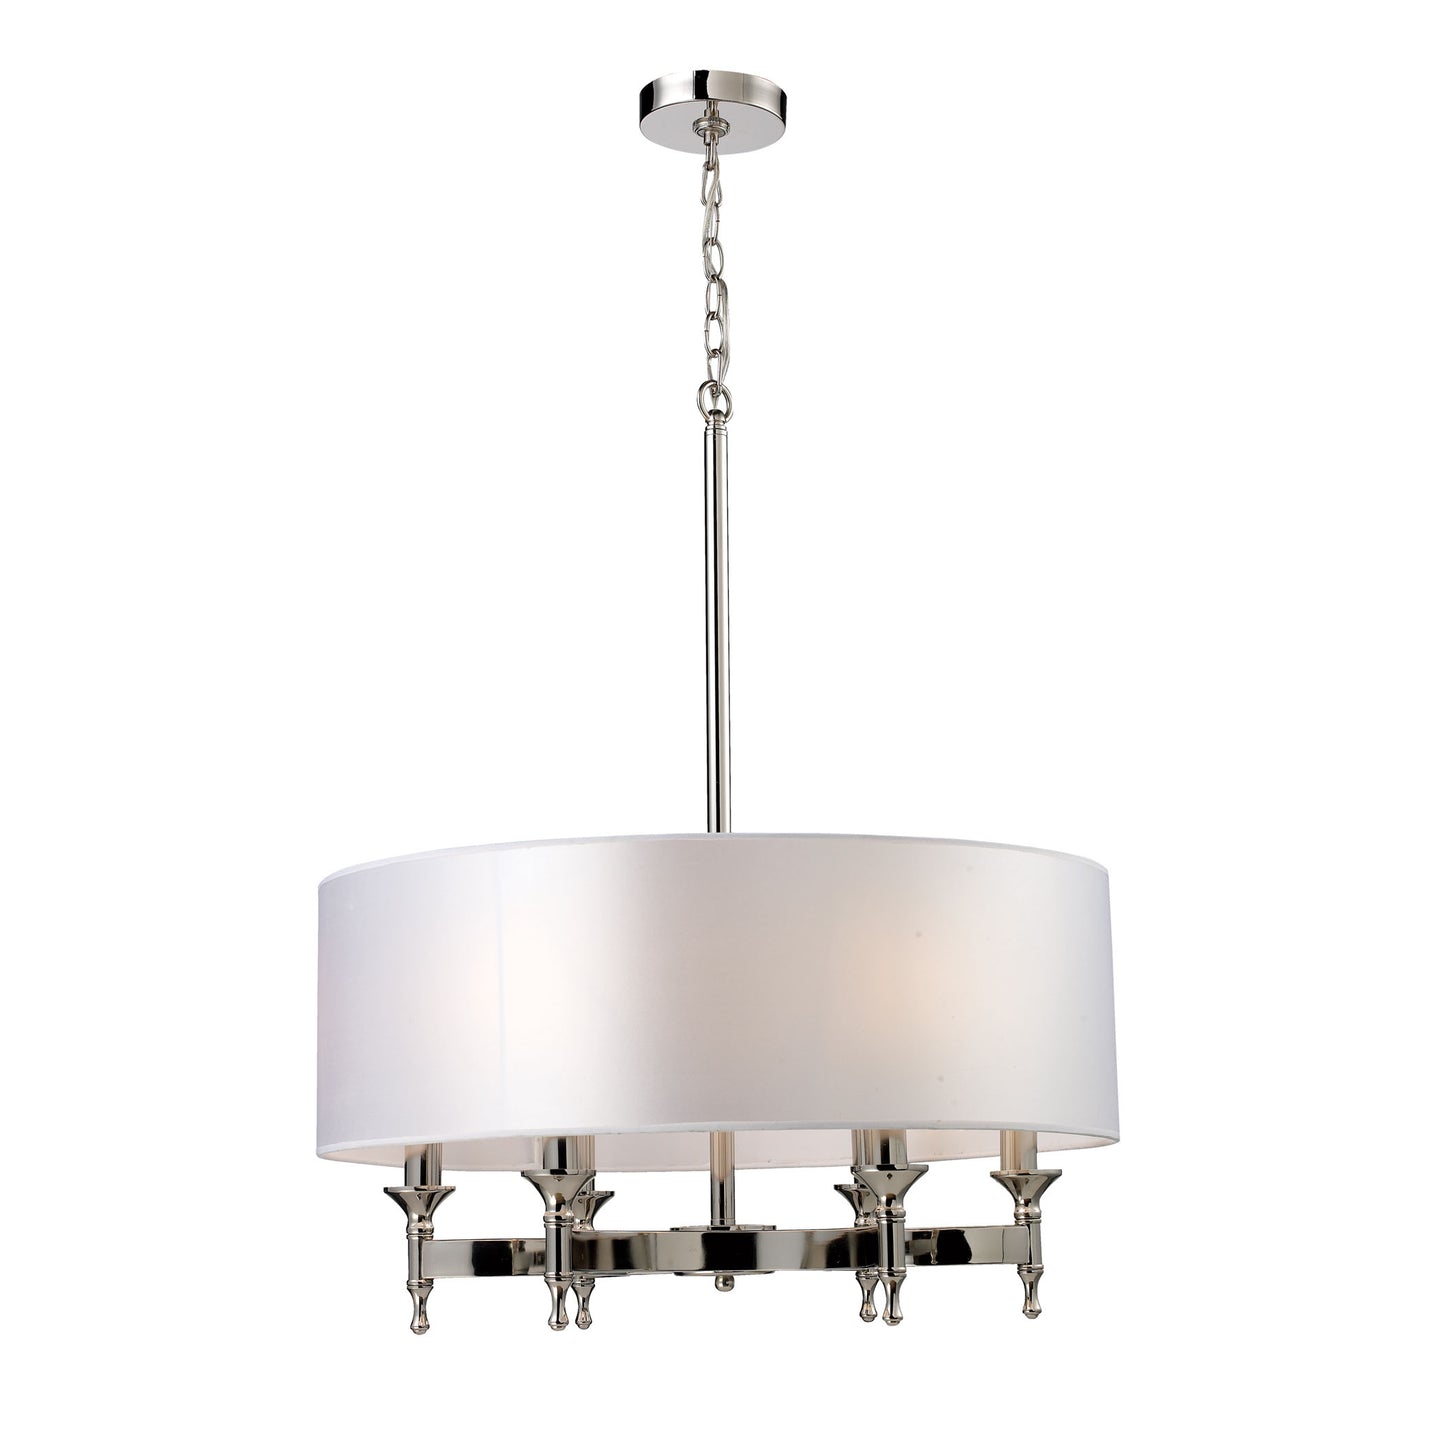 Pembroke 6-Light Chandelier in Polished Nickel with White Fabric Shade